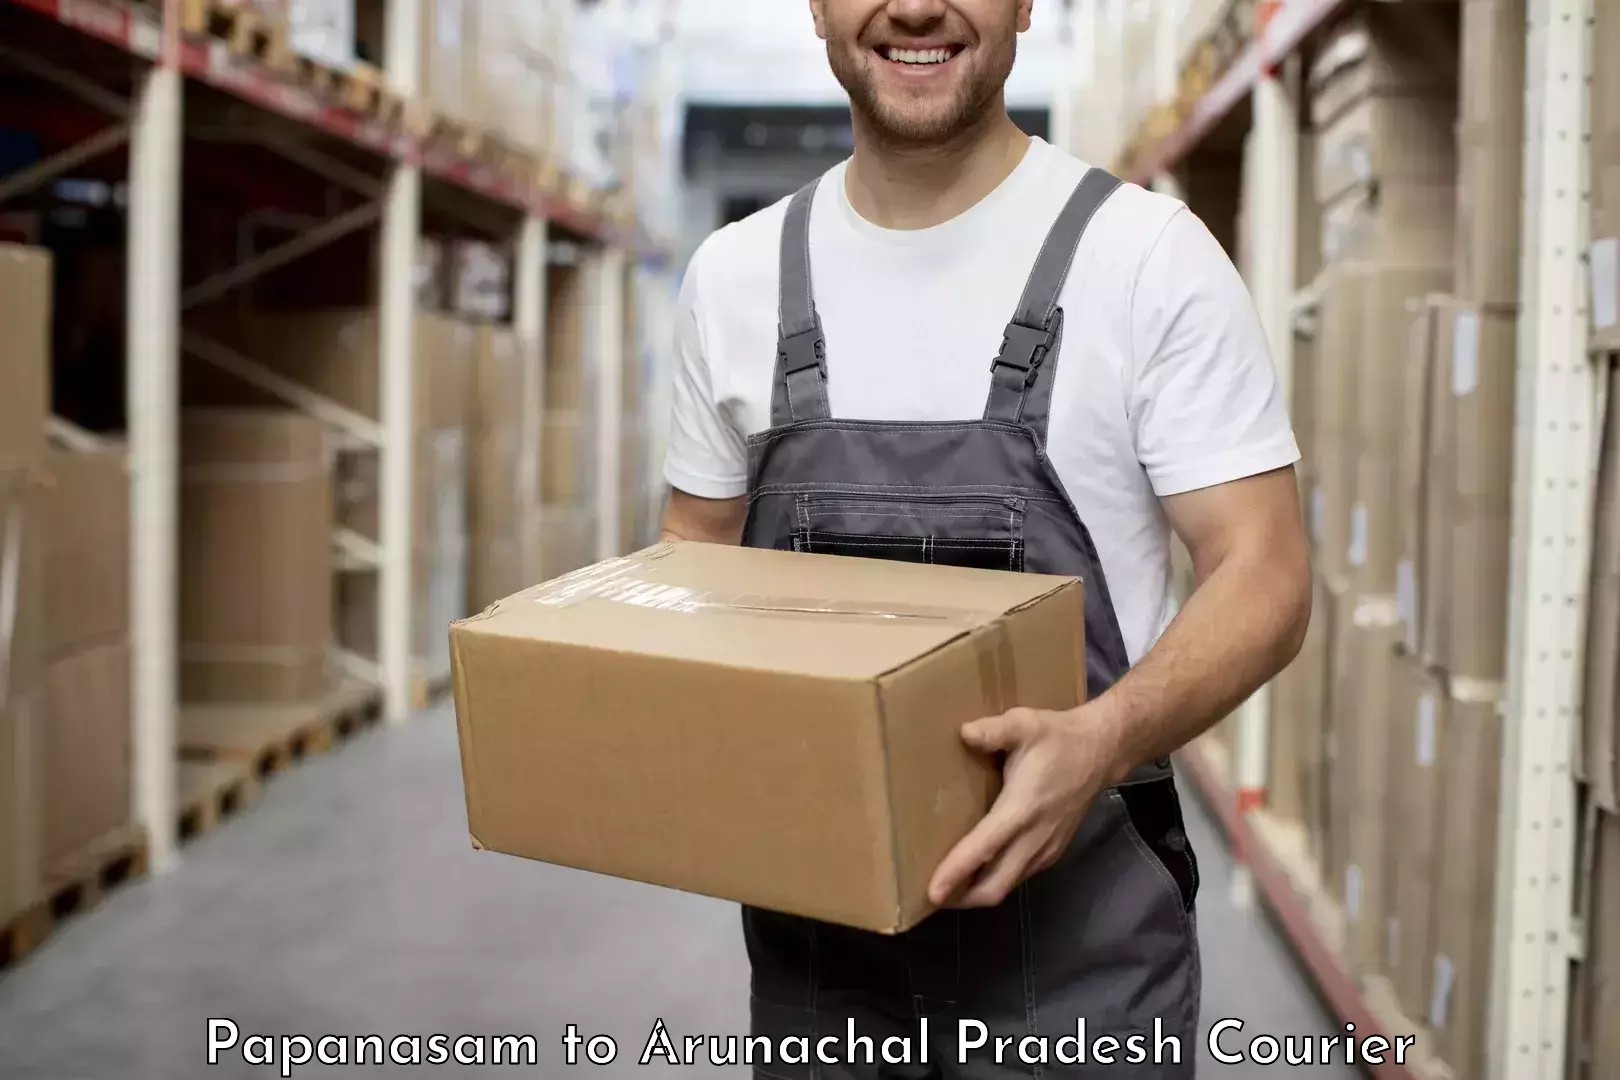 Professional courier handling Papanasam to Chowkham